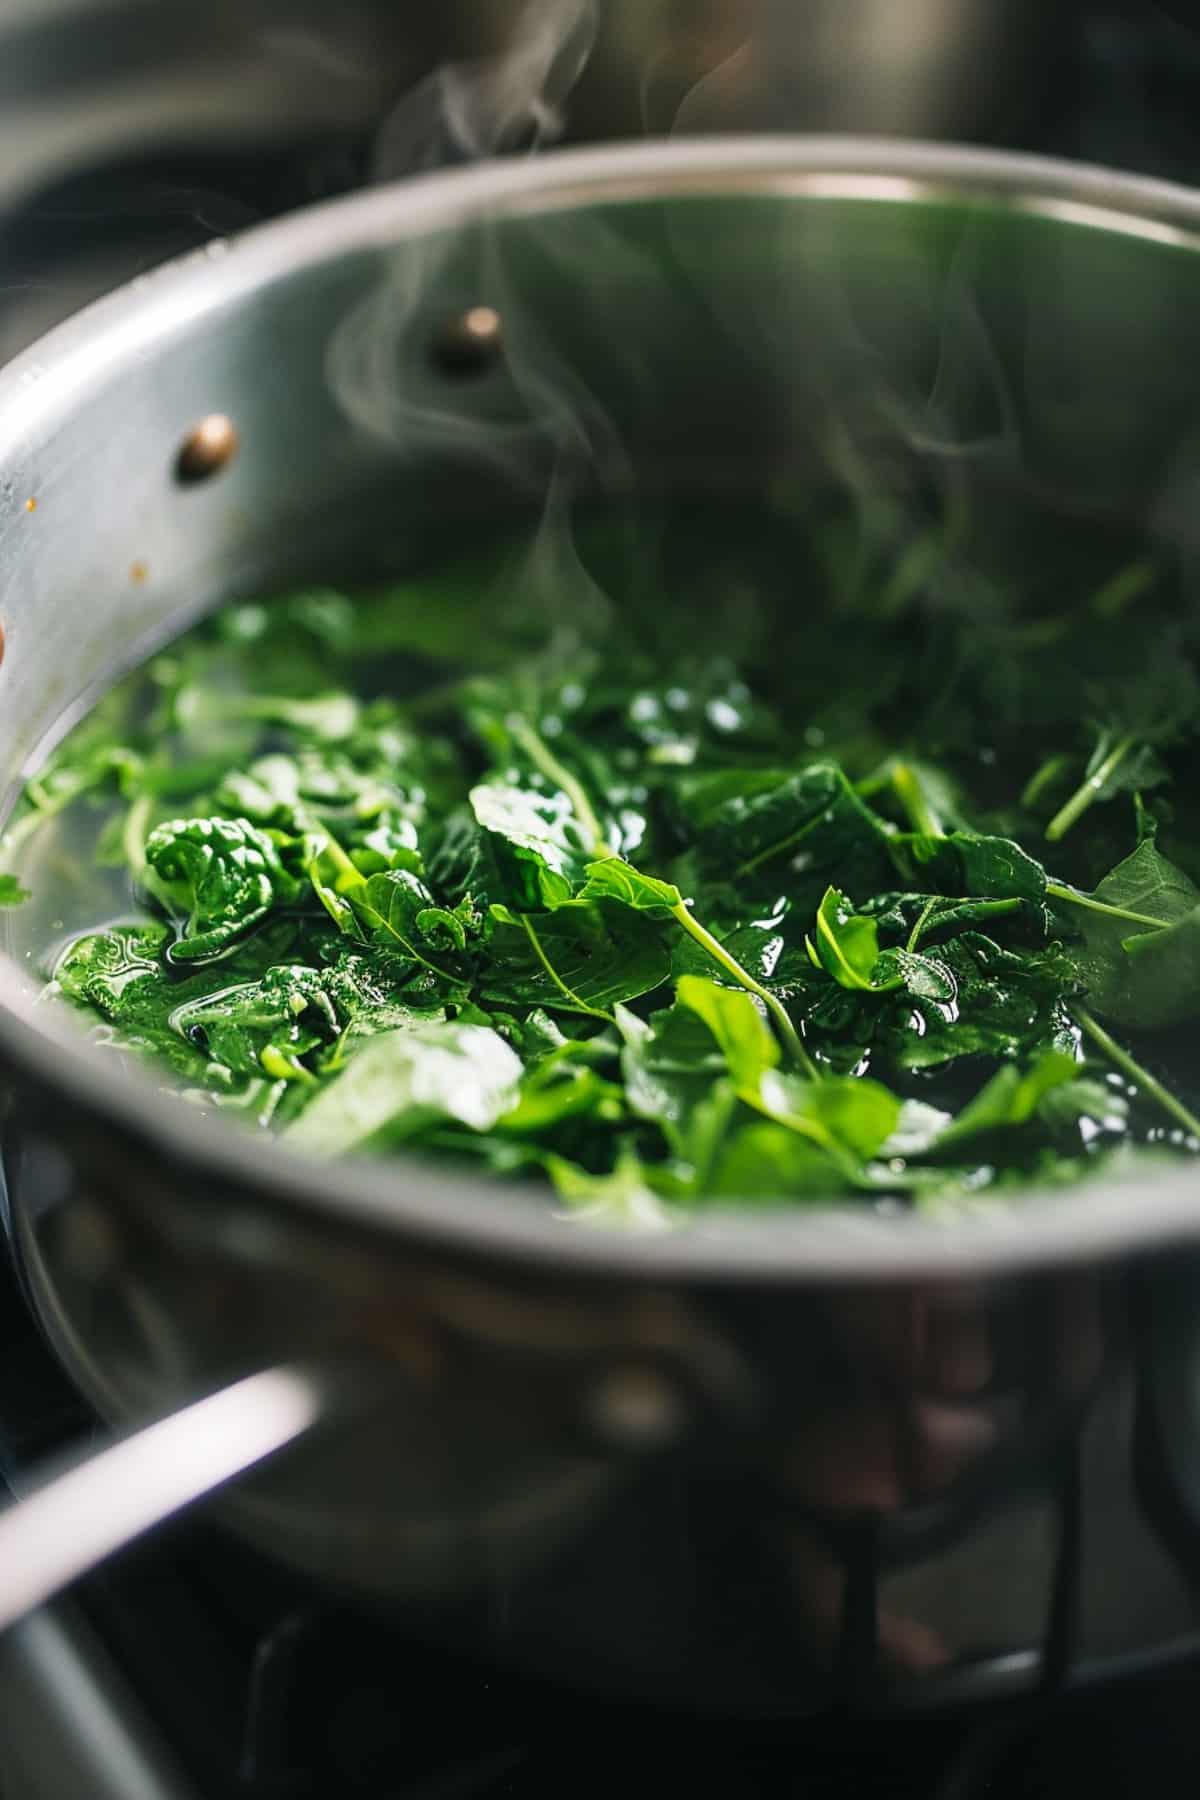 Watercress soup being cooked in a pan on the stove.